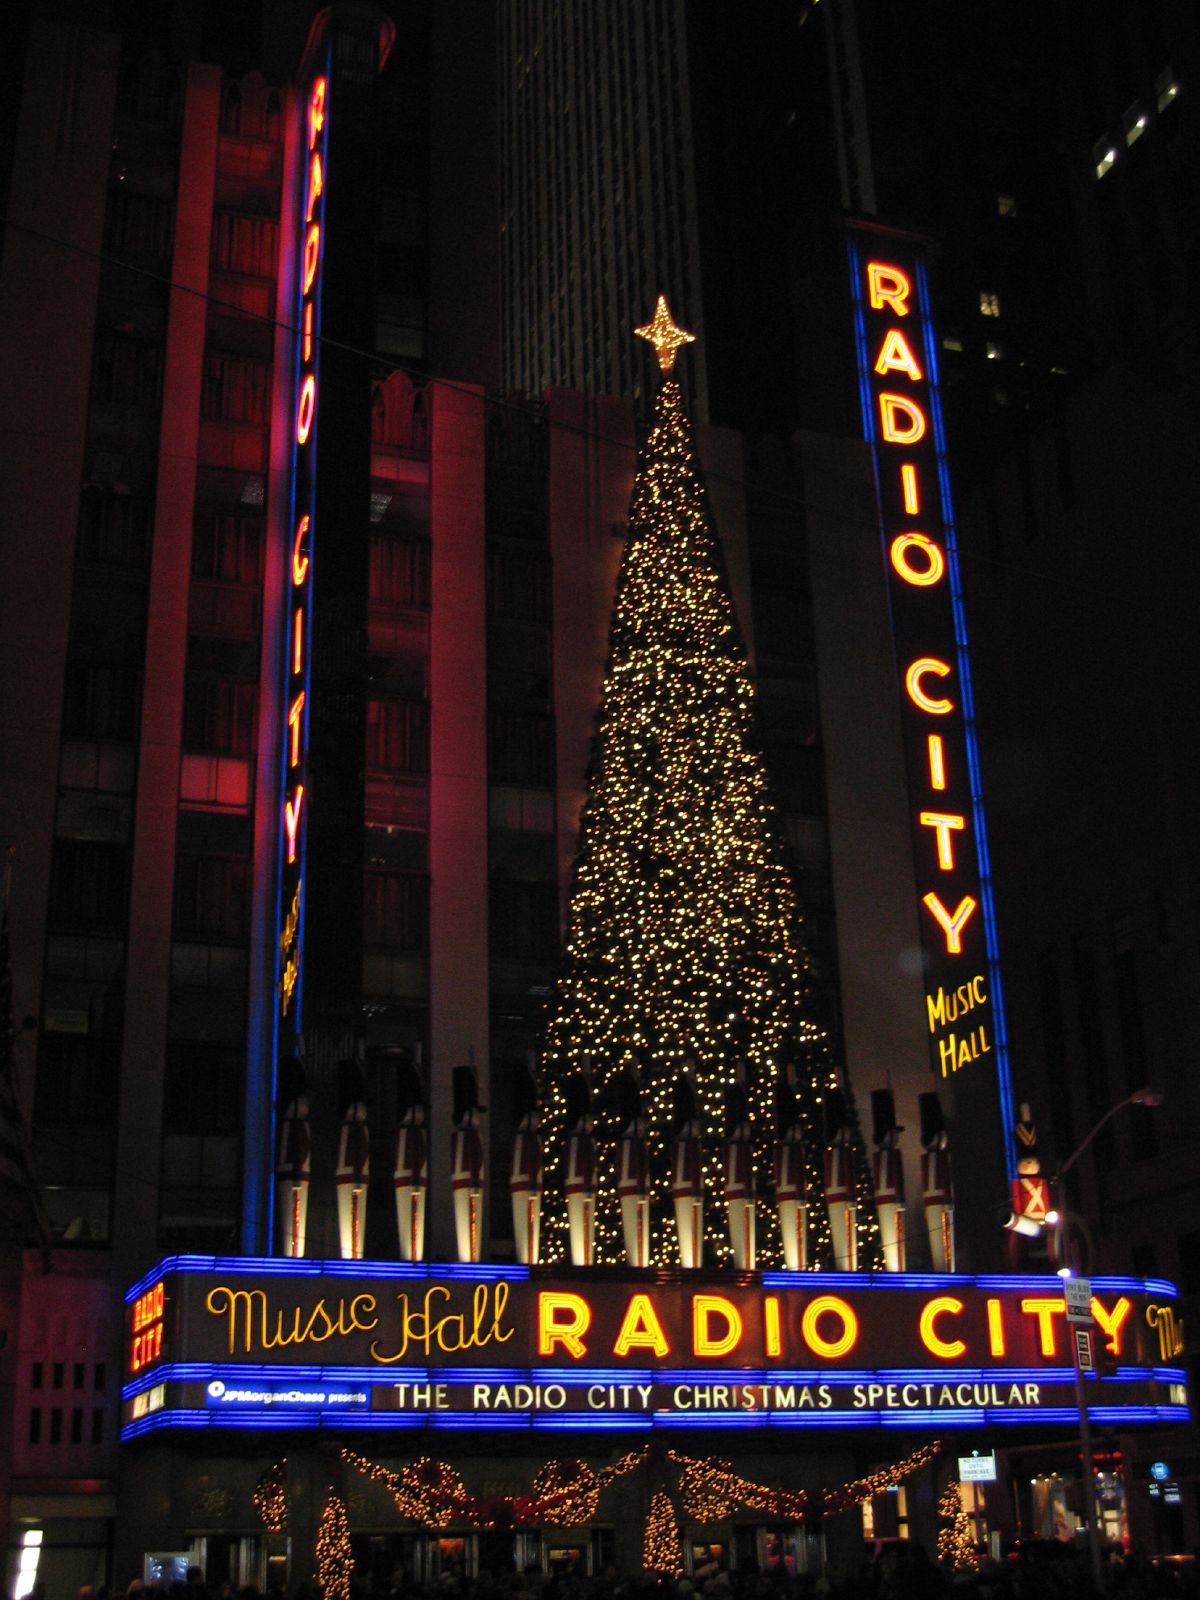 an outdoor radio city christmas tree is lit up